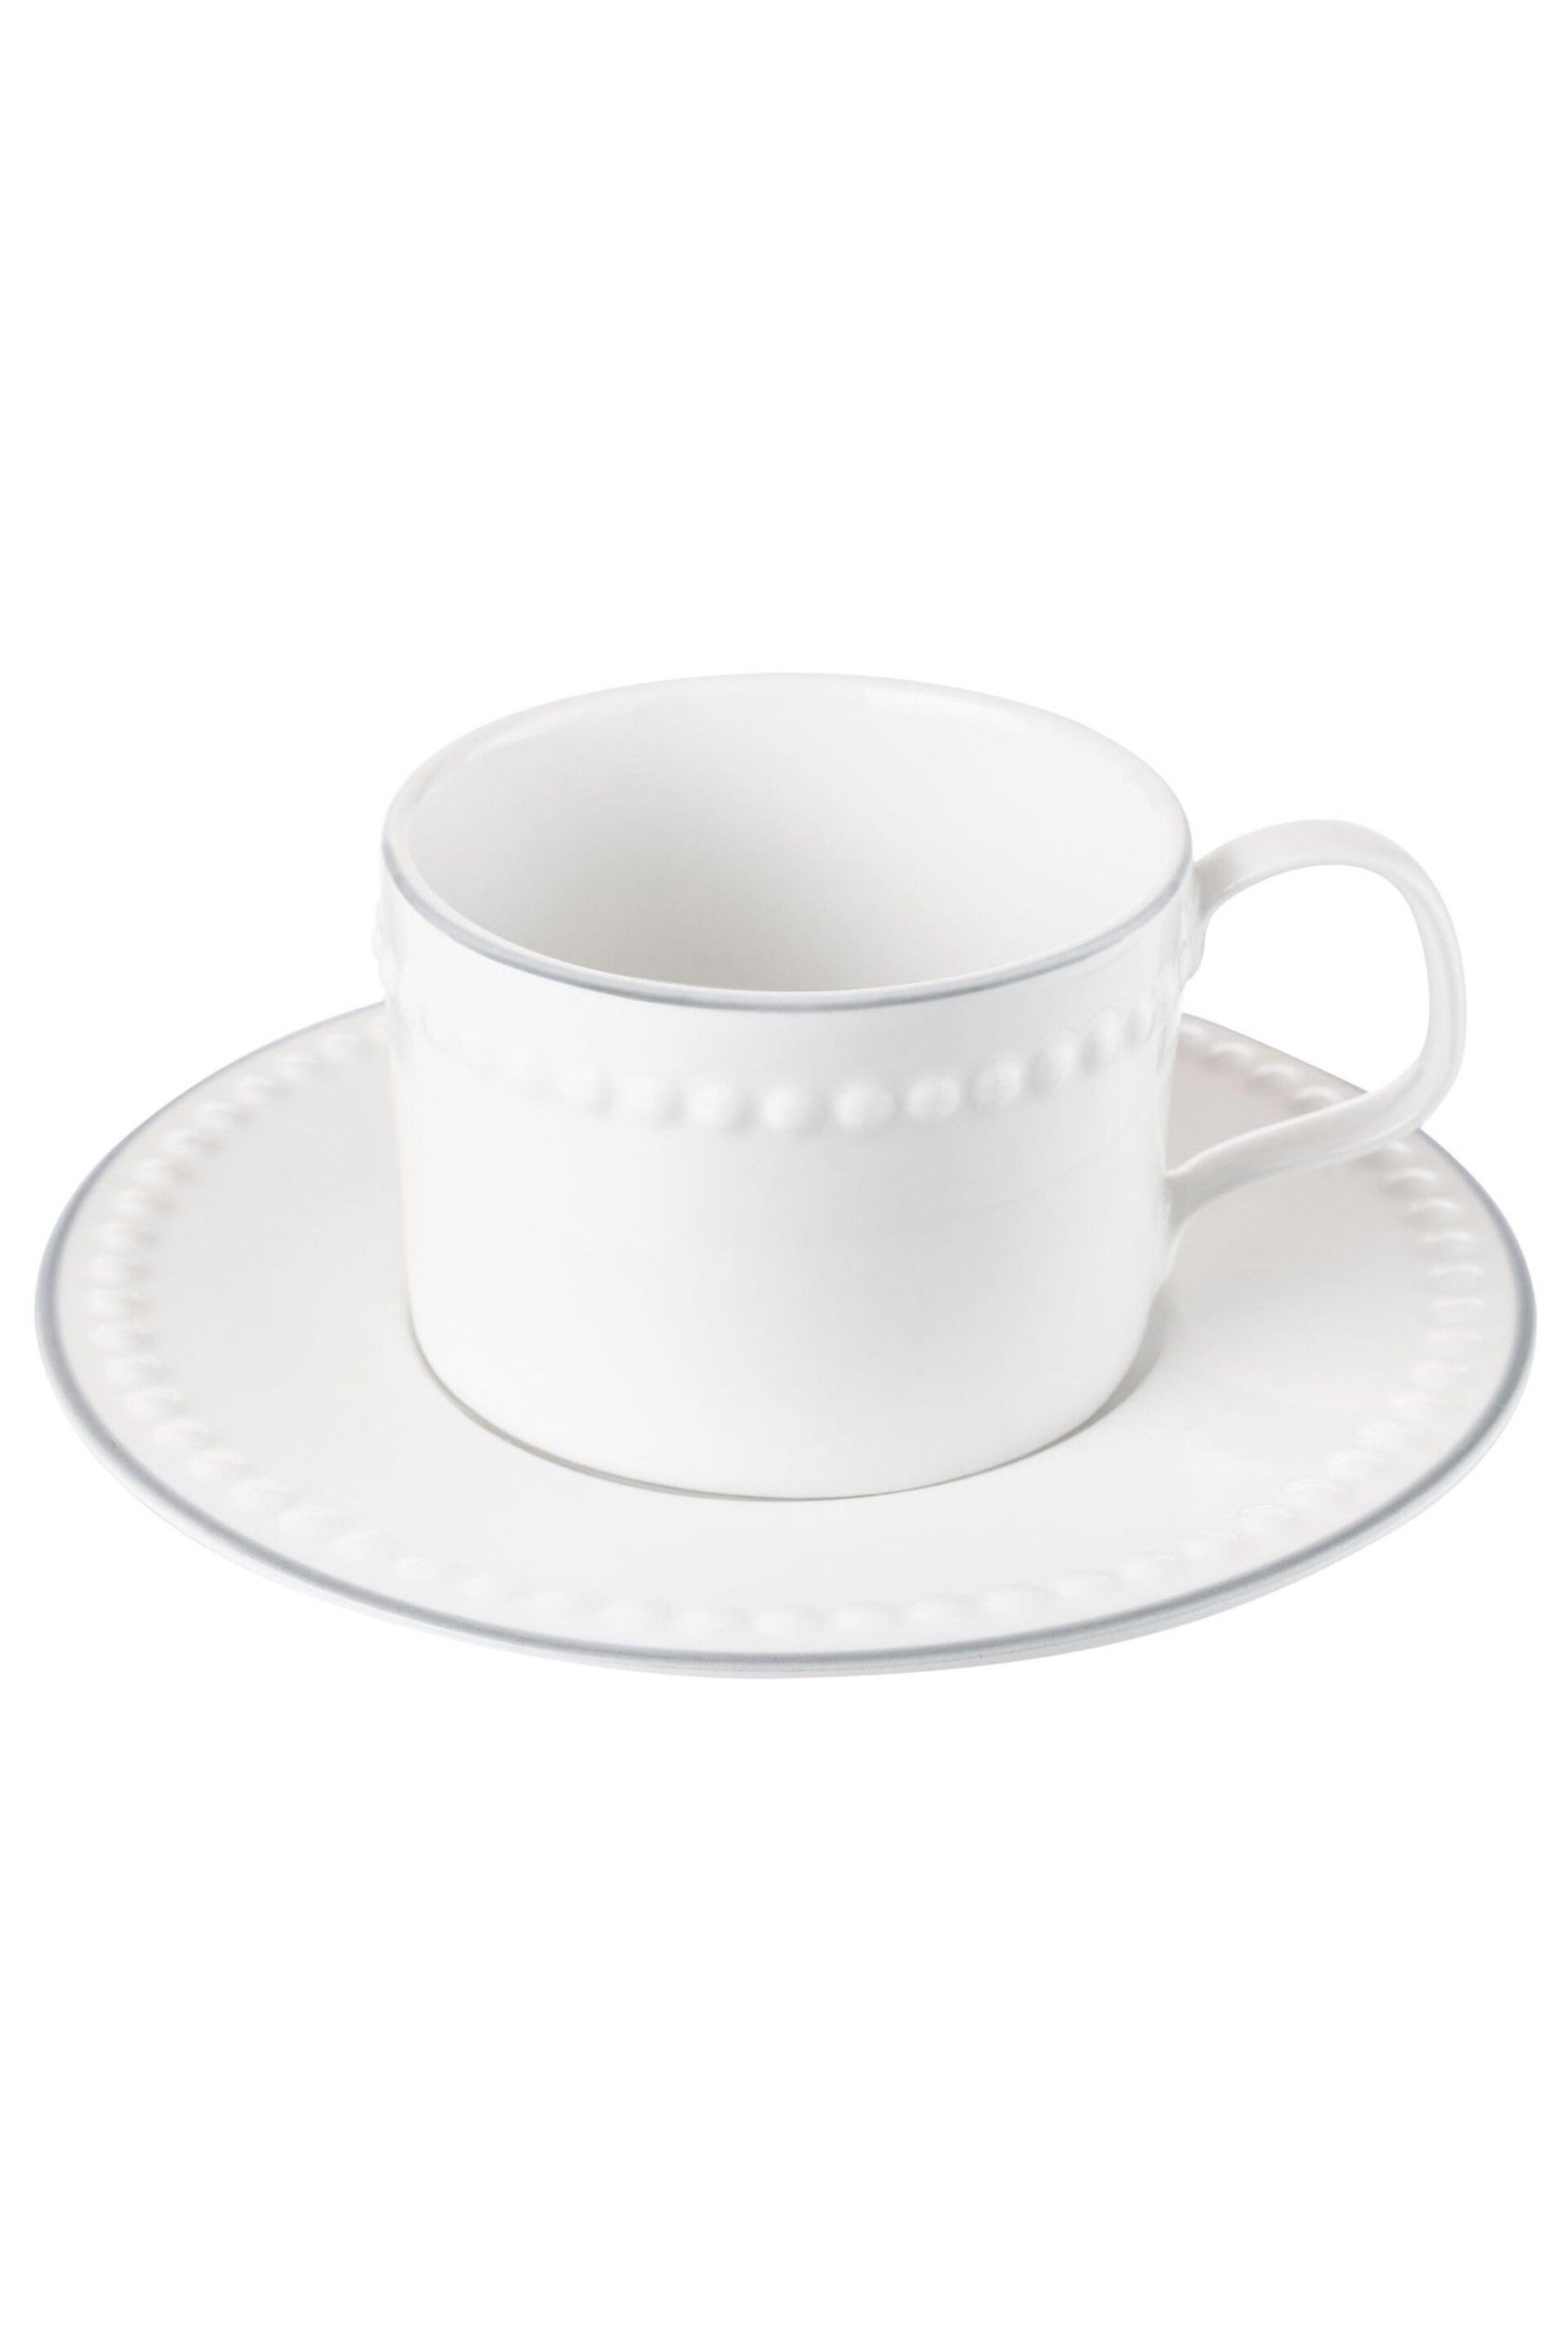 Mary Berry Set of 2 White Signature Cup & Saucers 225ml - Image 3 of 3